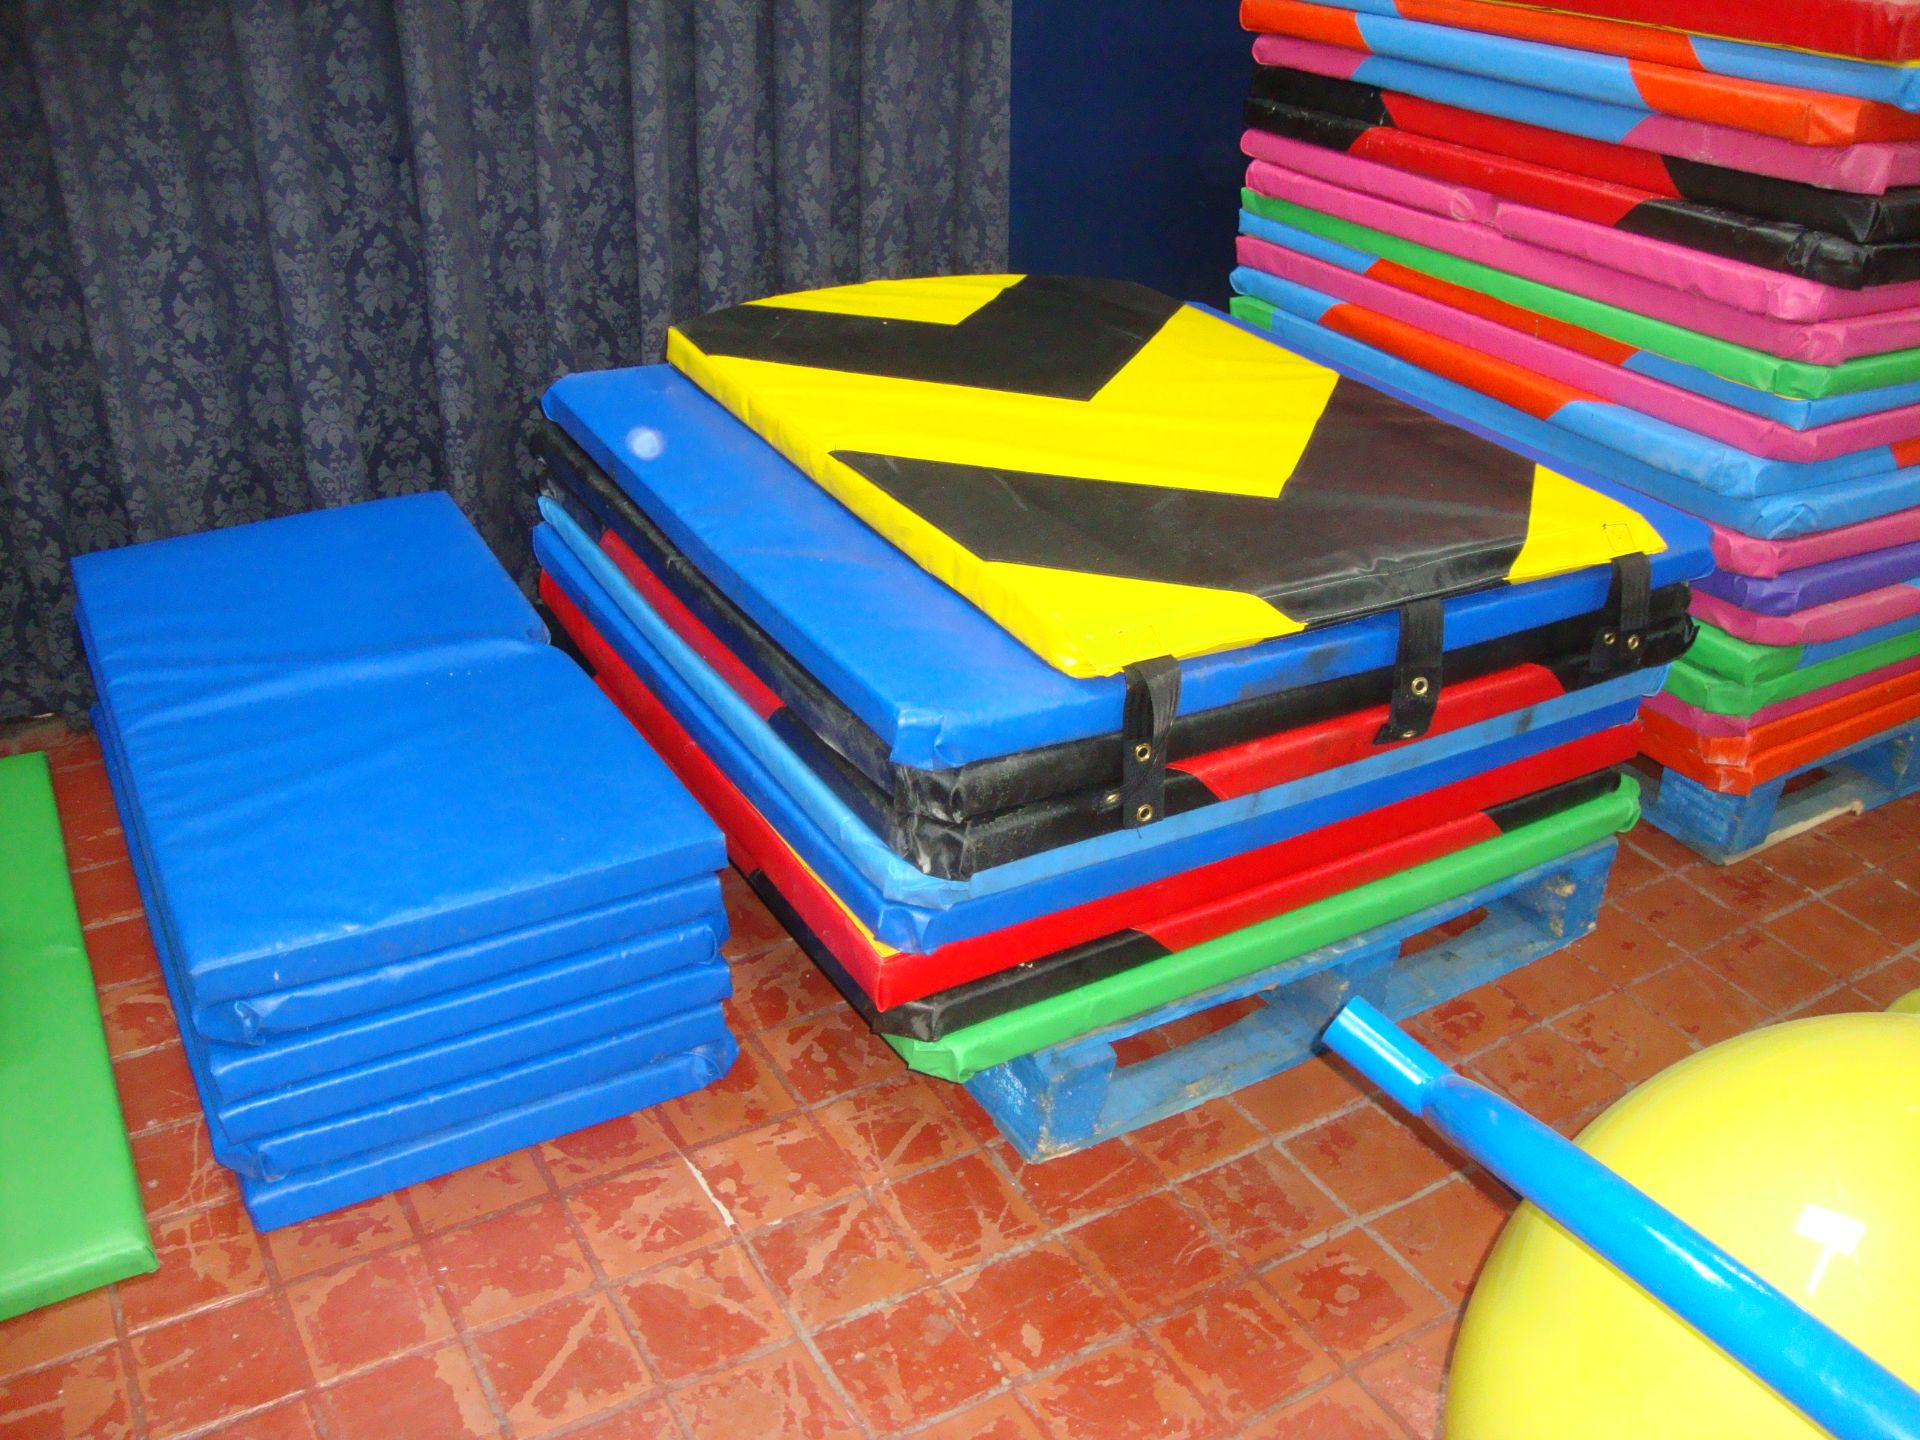 Soft Play Equipment - Image 16 of 25